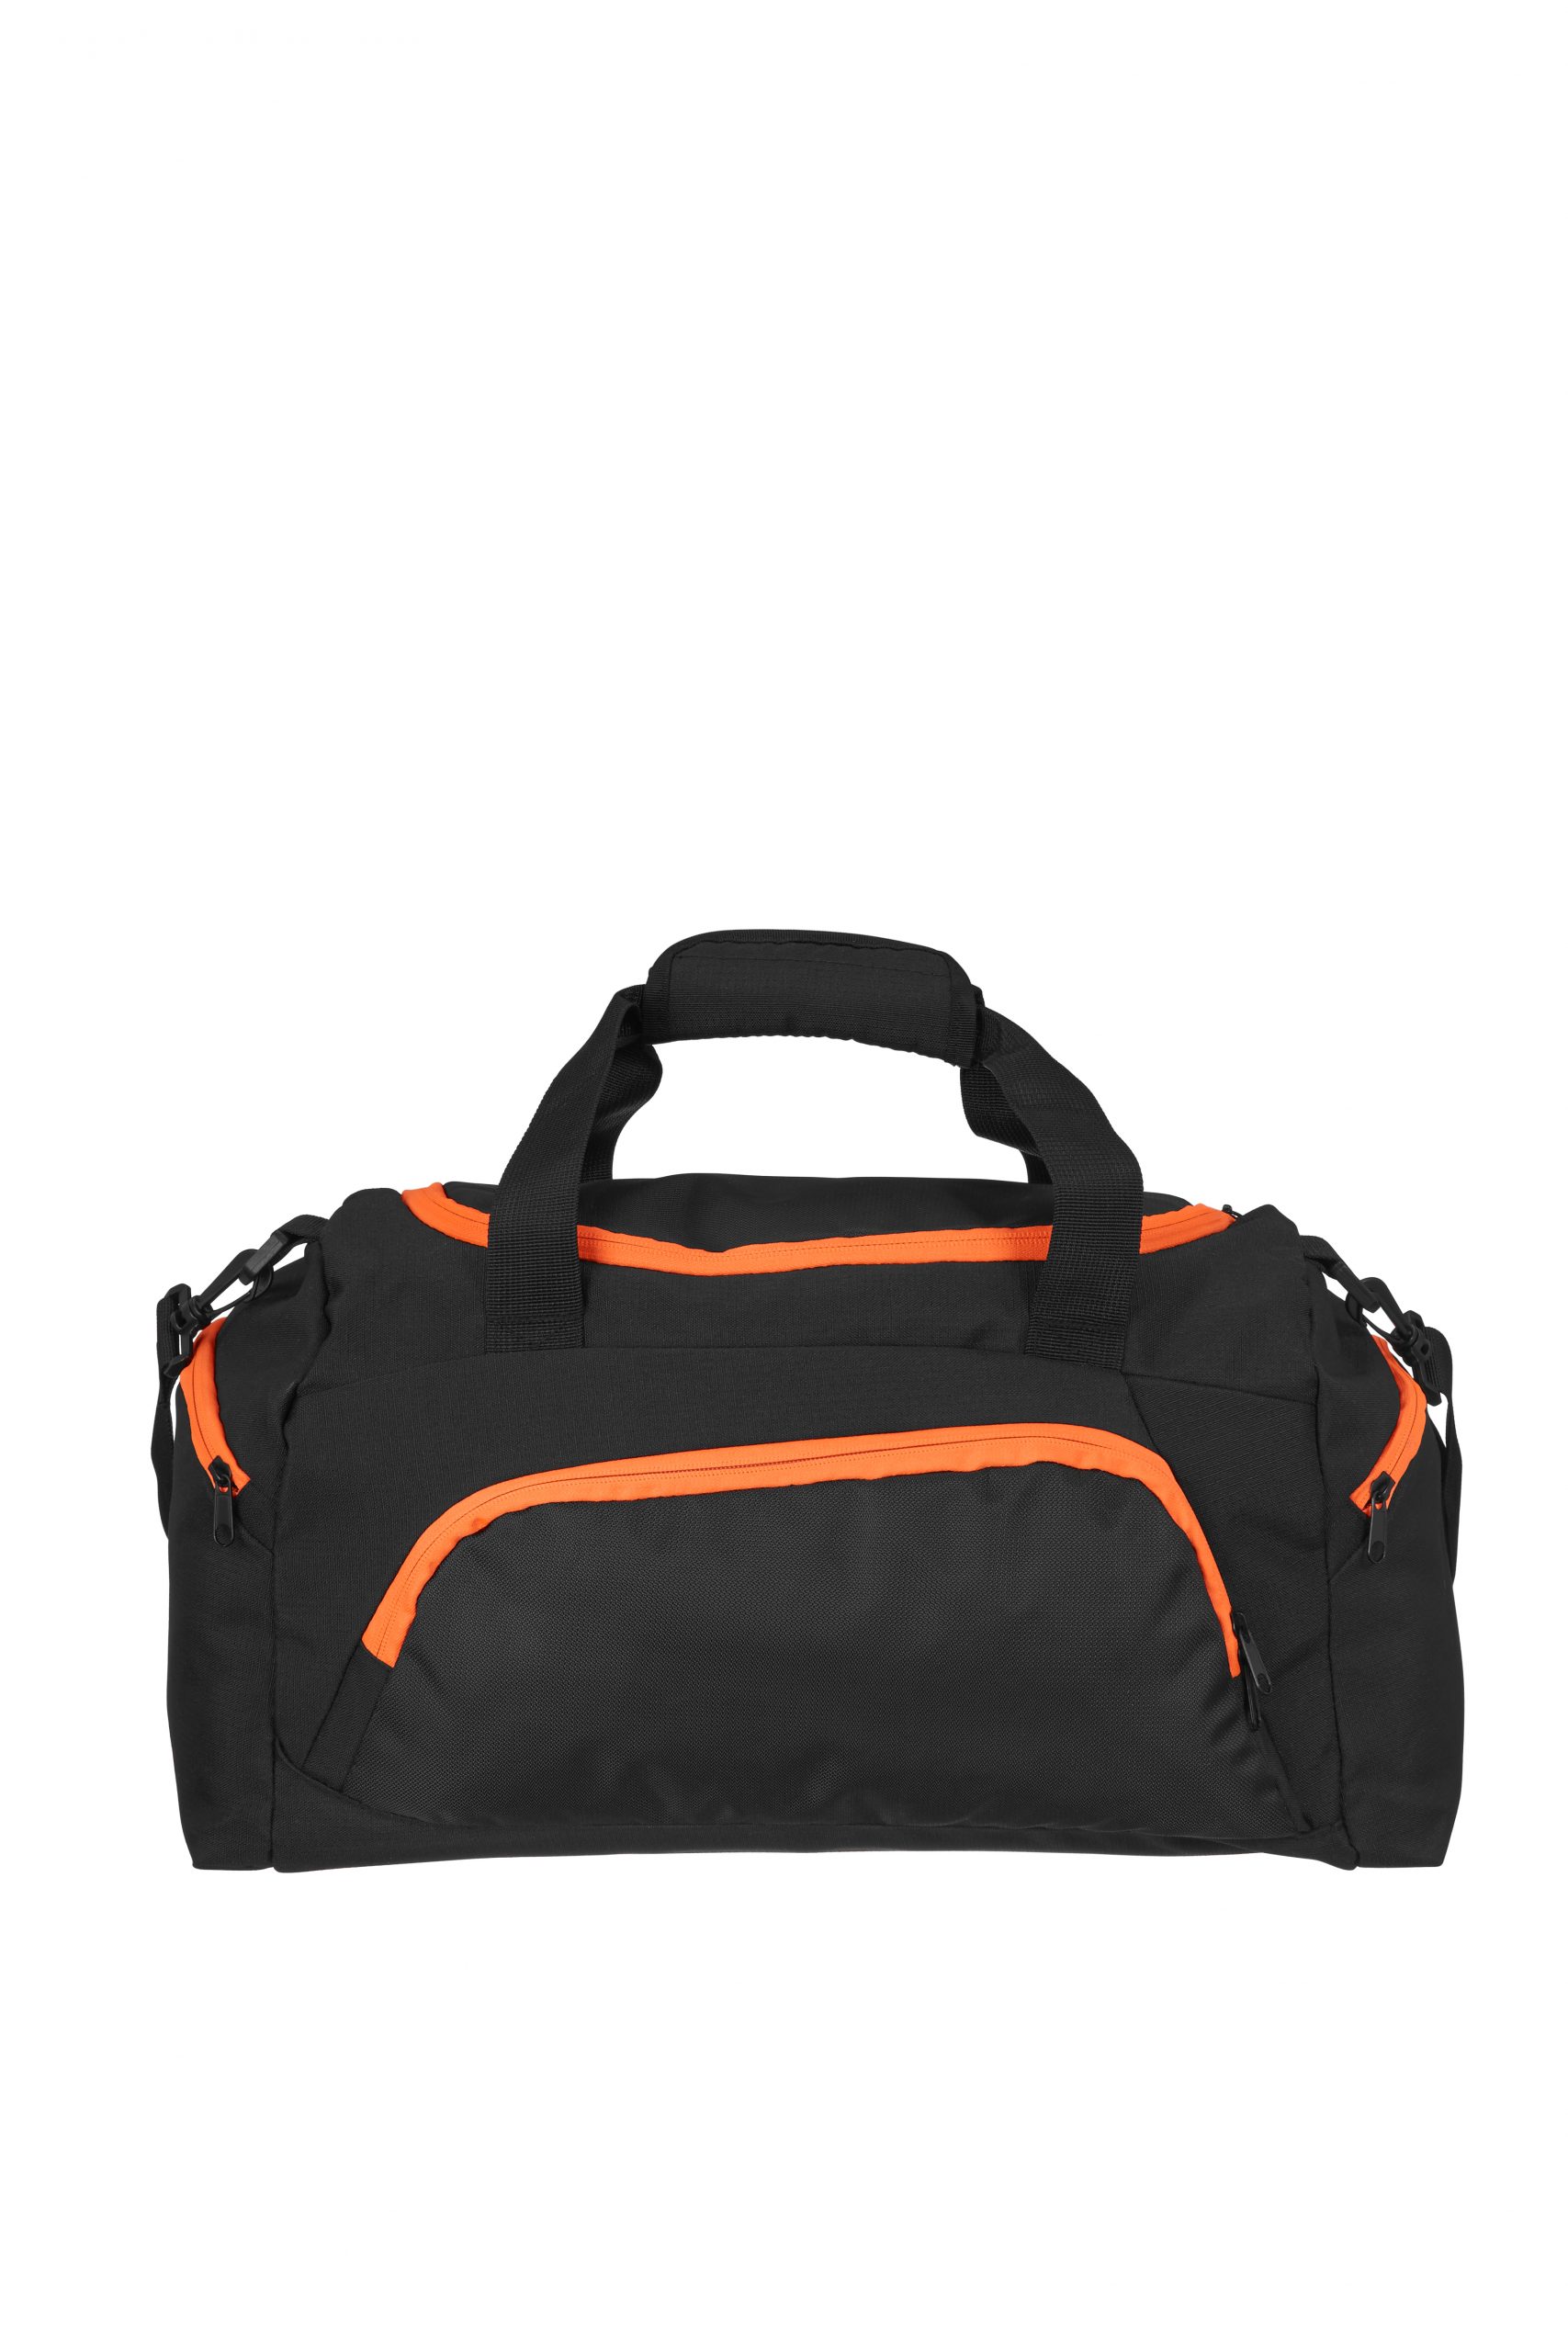 Grizzly Active Line Sportbag small musta/oranssi